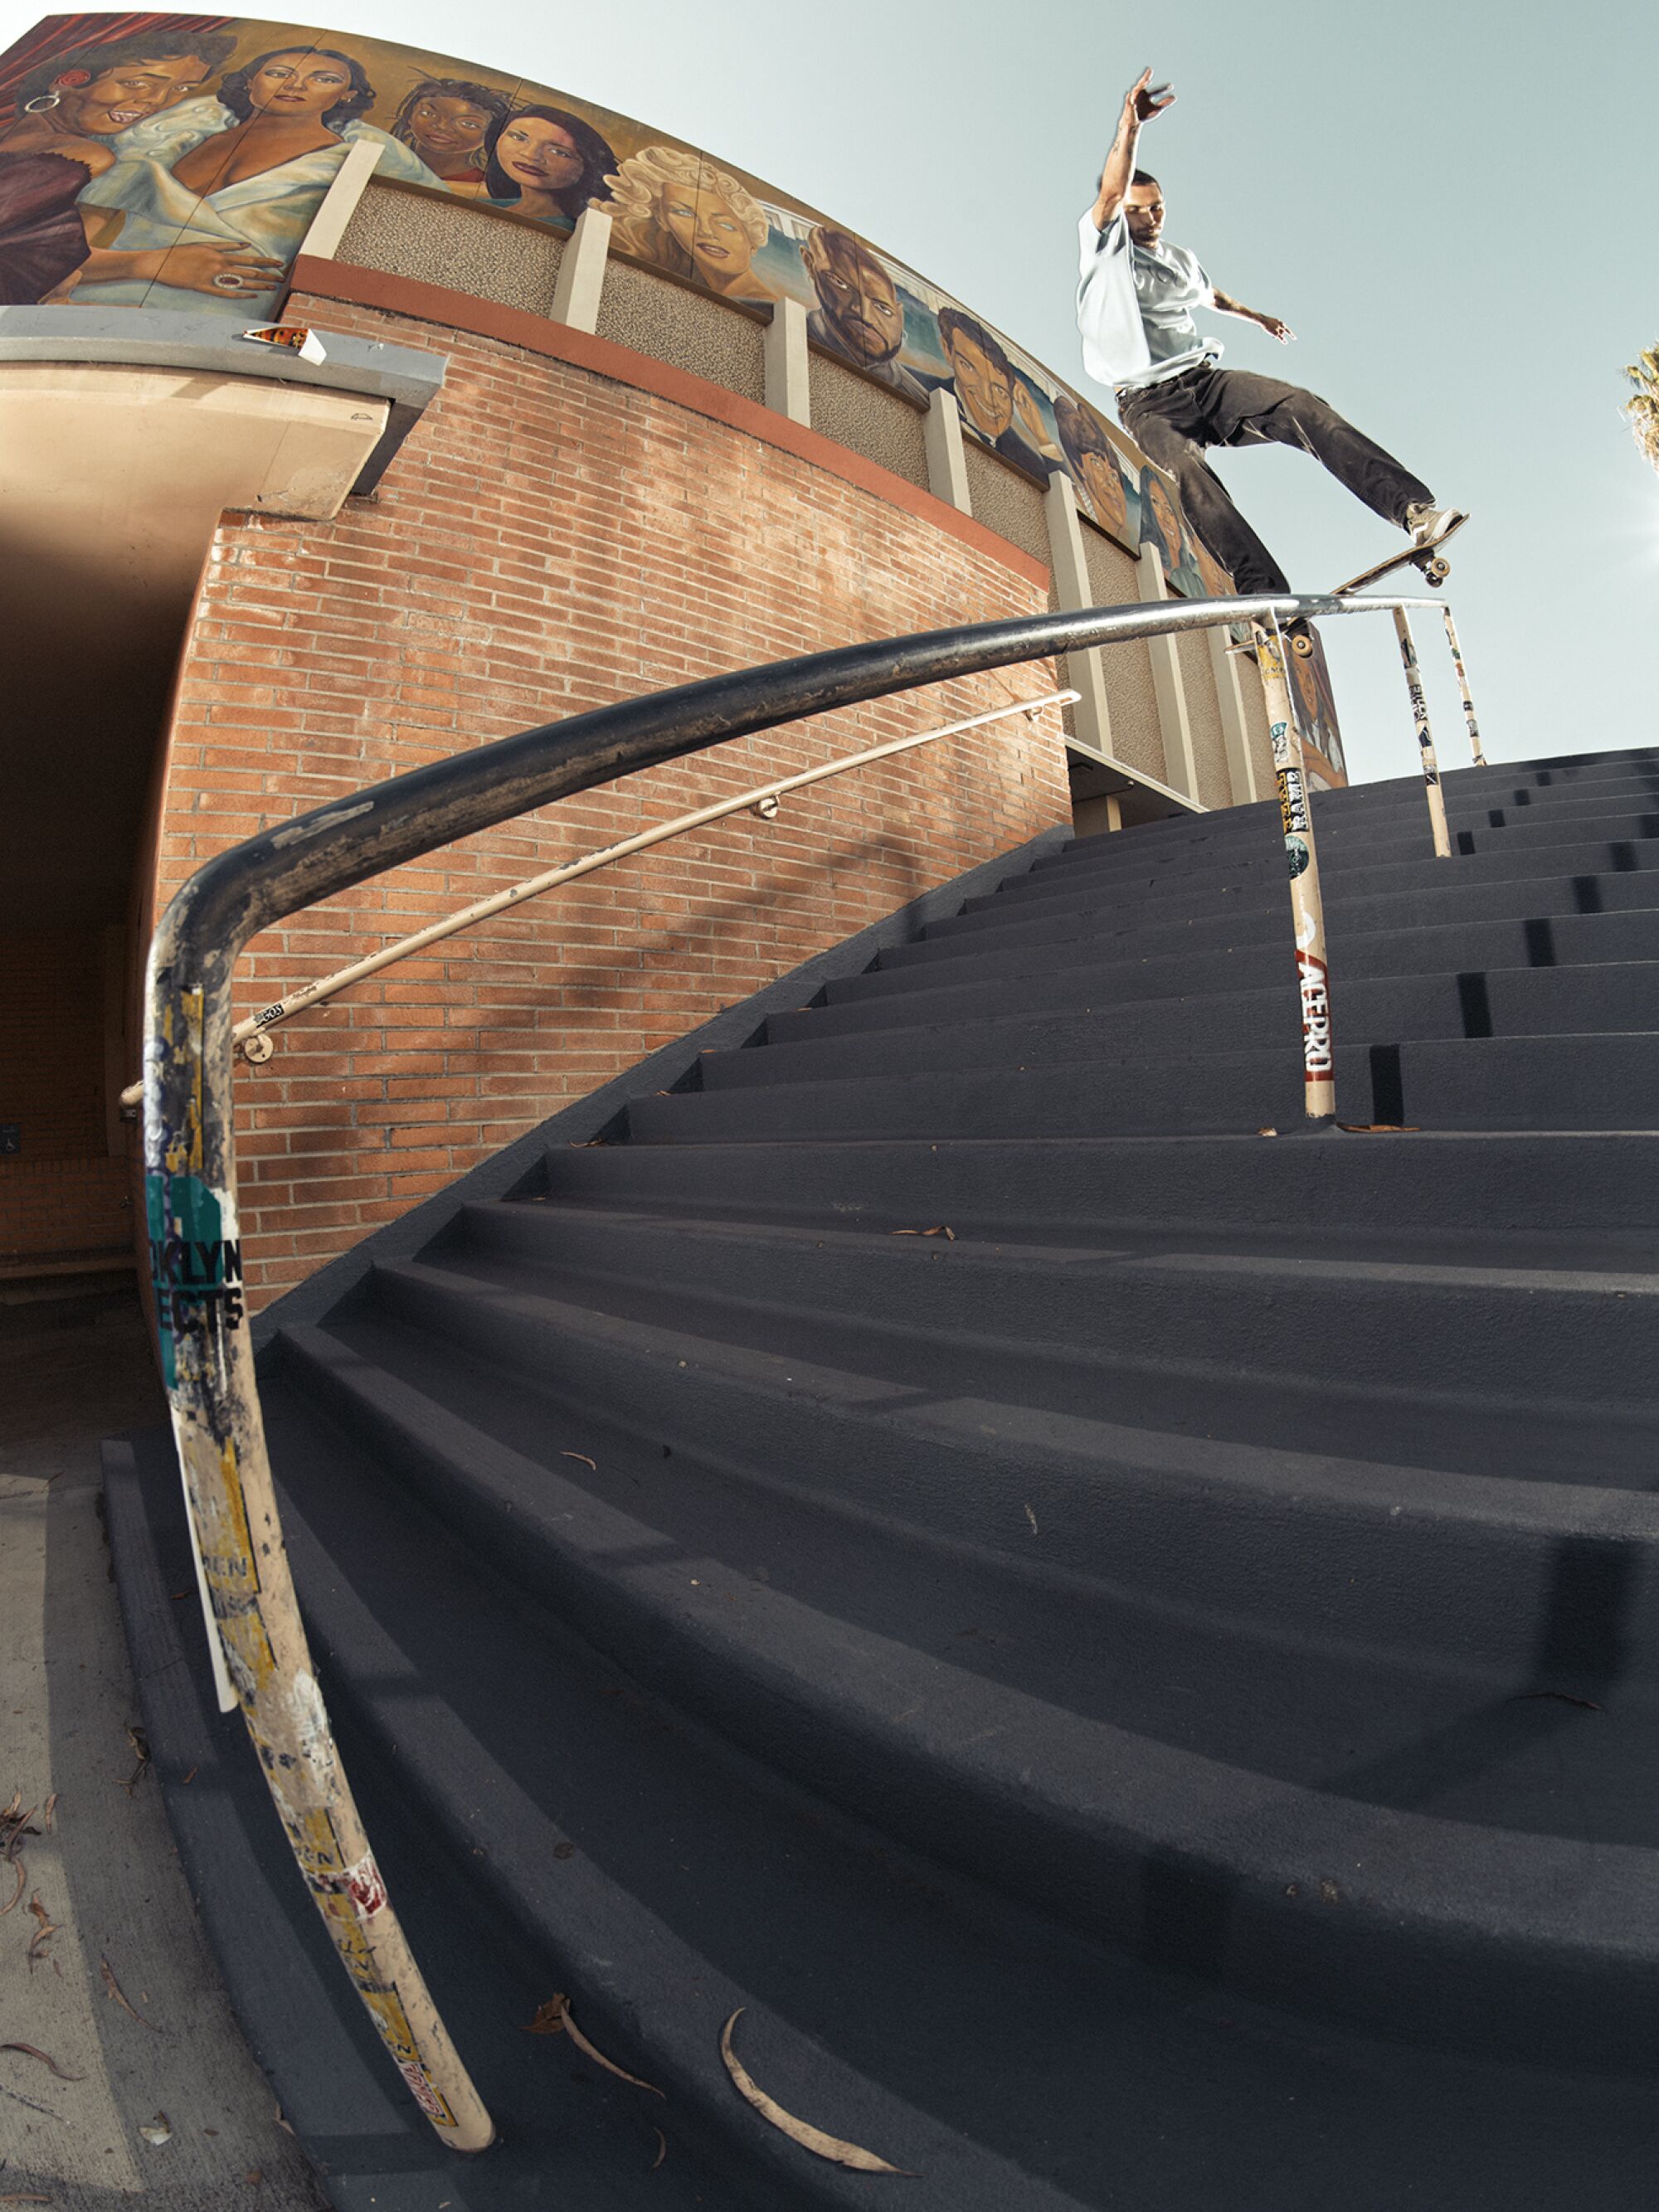 Kyle Walker slides down a rail from the top of the stairs.